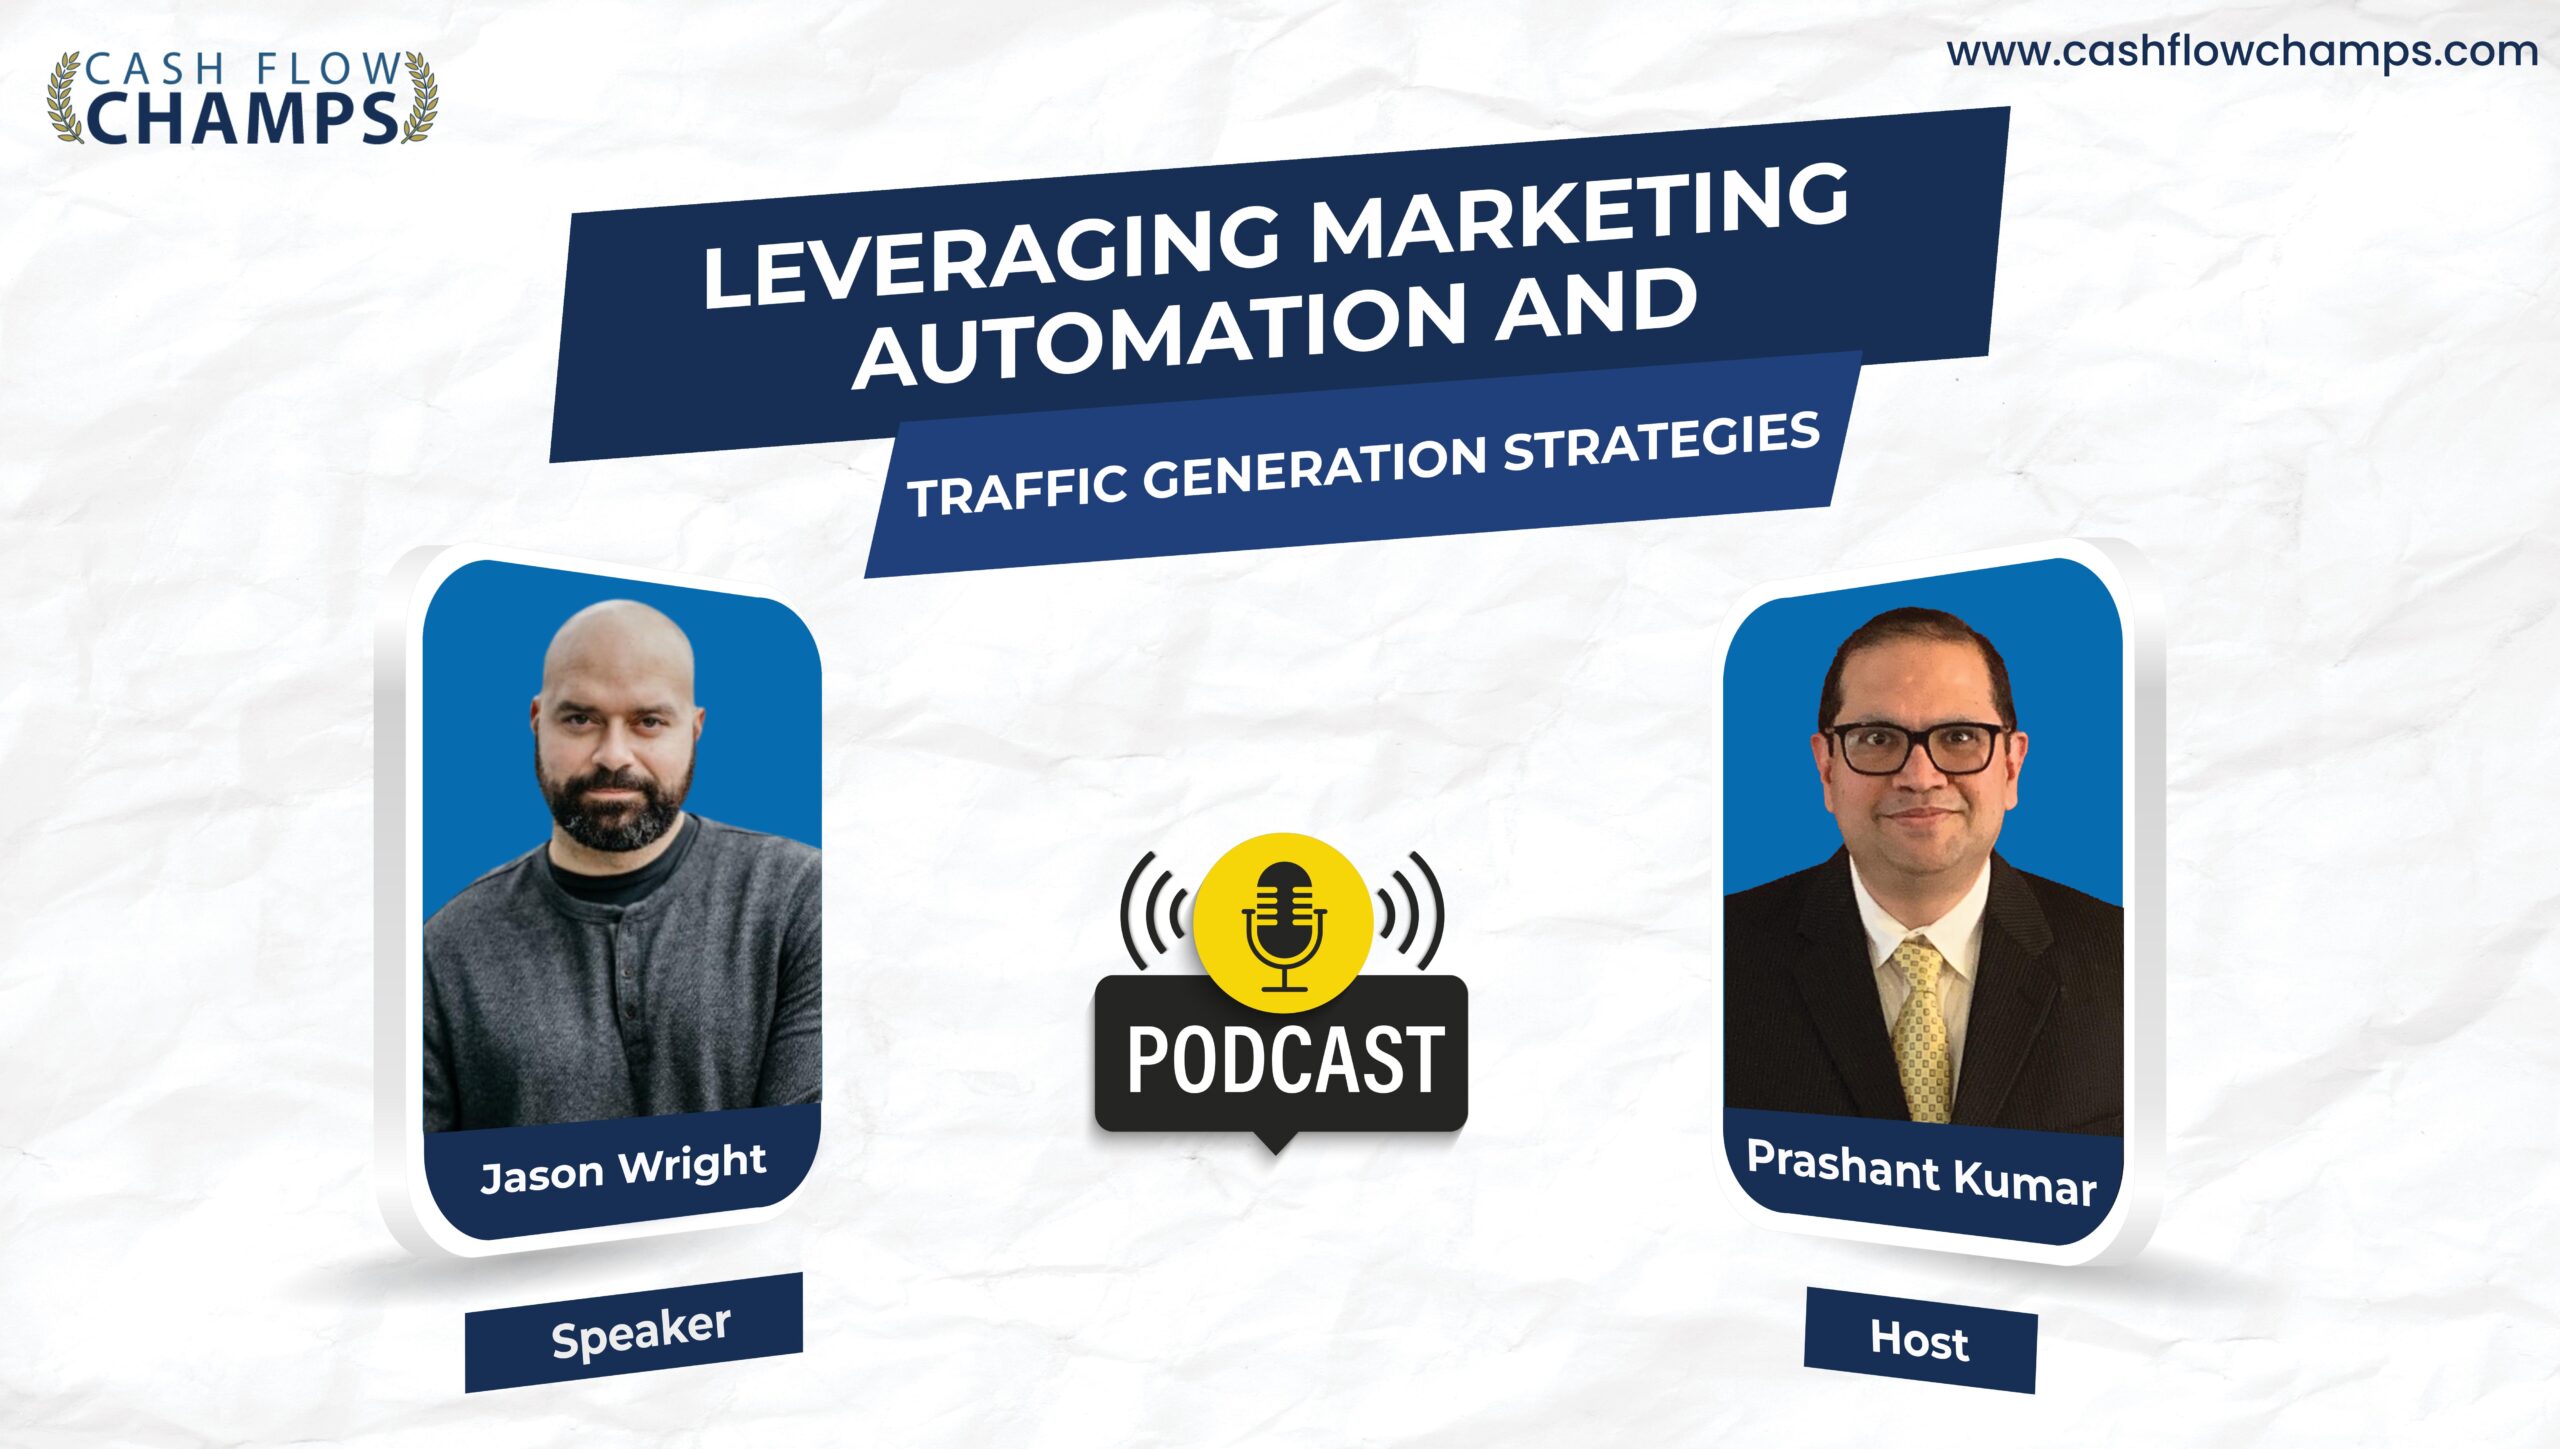 Leveraging Marketing Automation And Traffic Generation Strategies